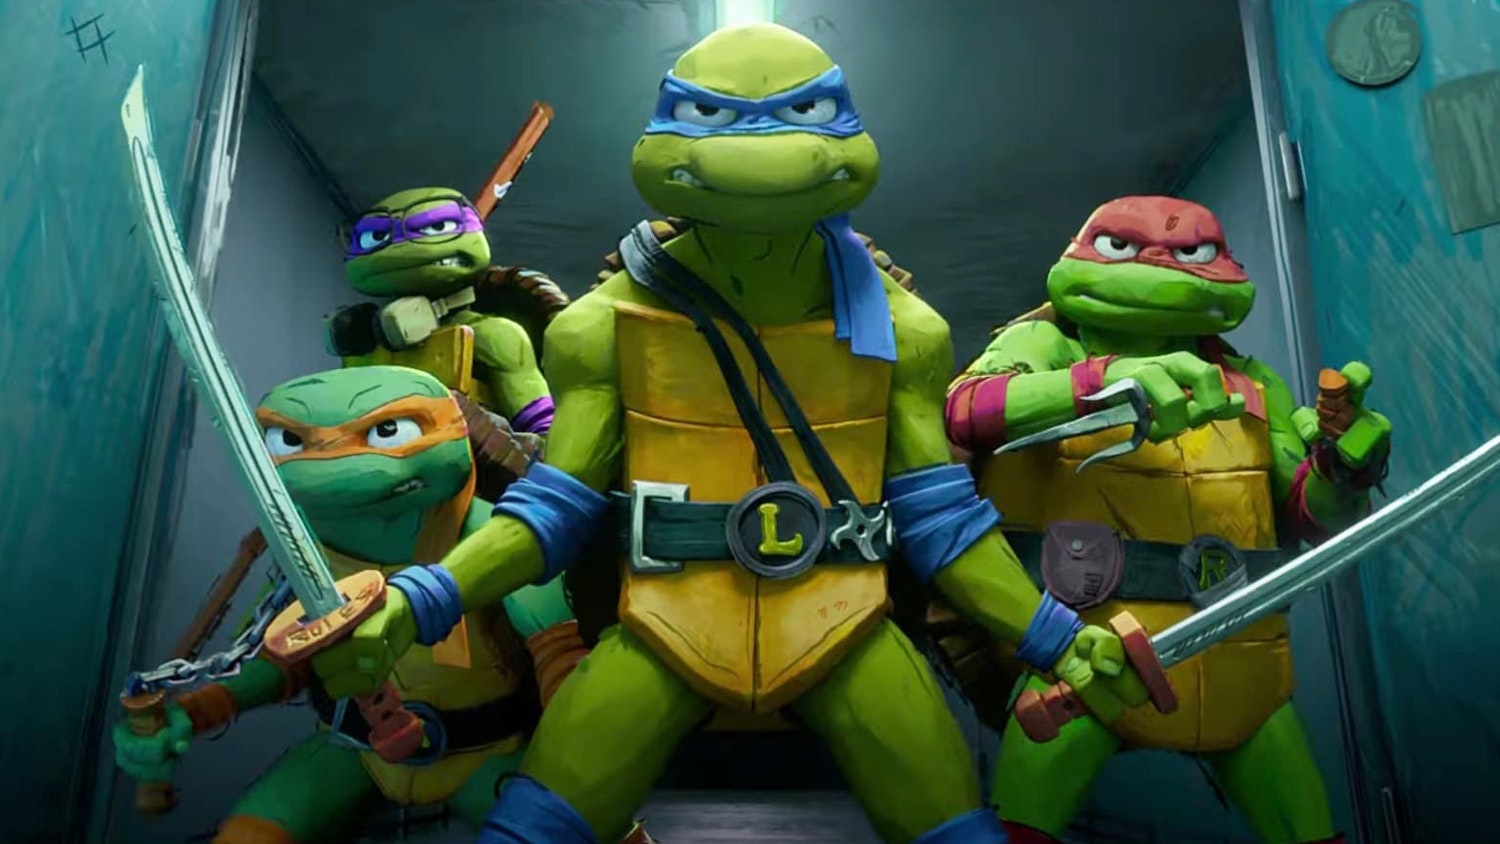 All you need to know about the Teenage Mutant Ninja Turtles